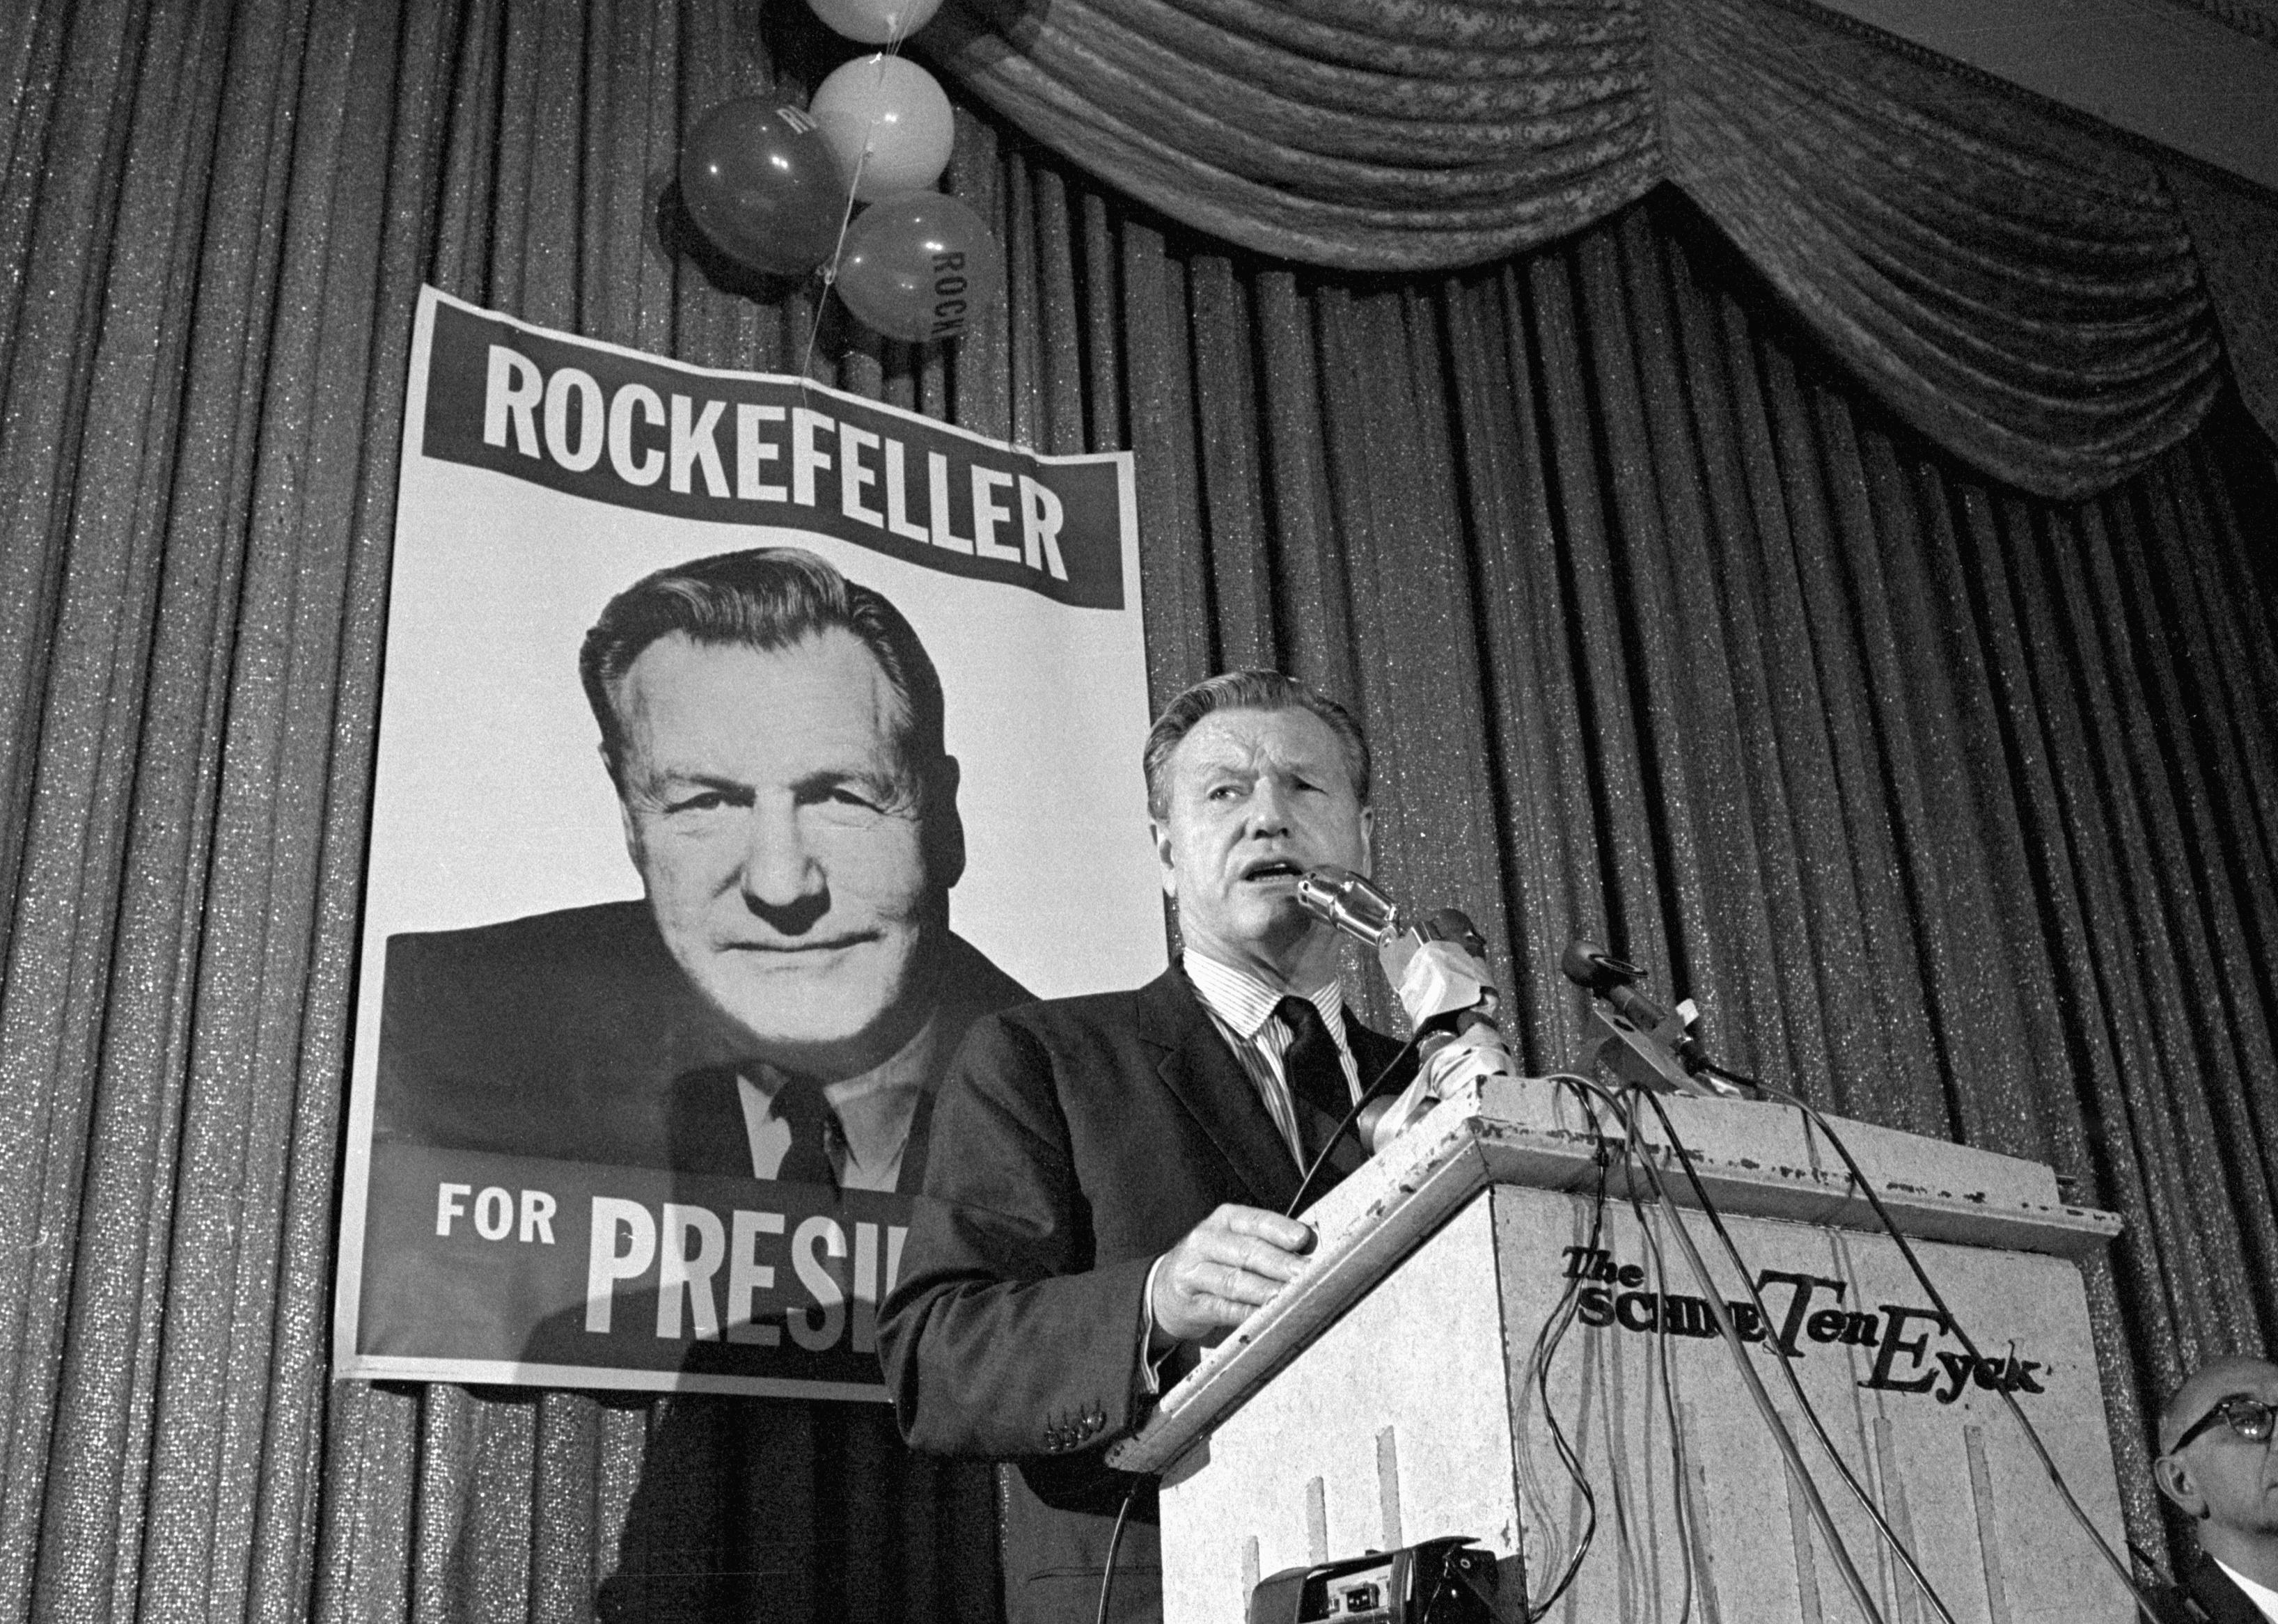 Nelson Rockefeller giving a campaign speech onstage.